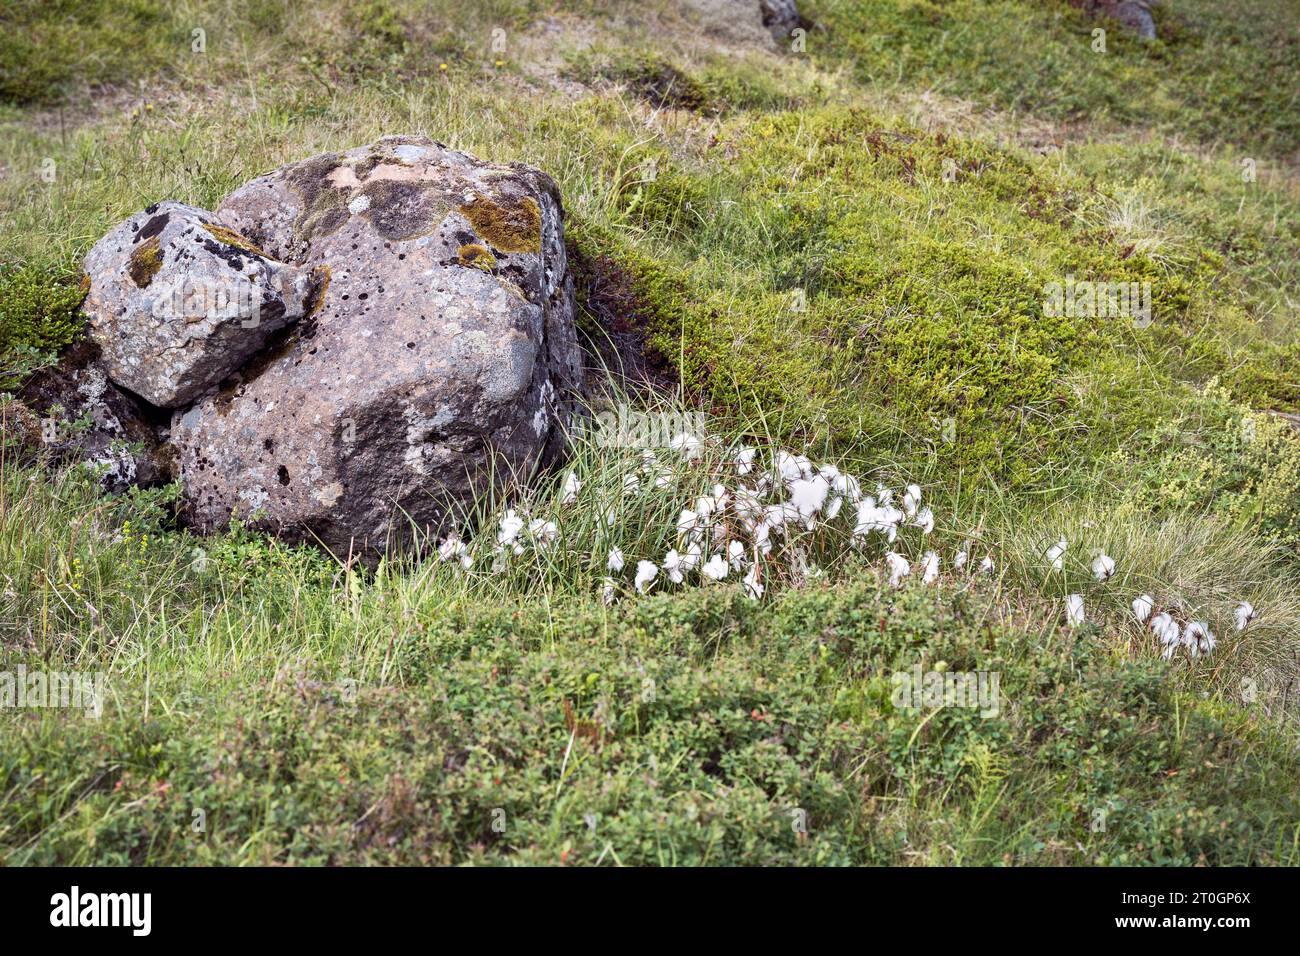 common white cotton sedge Eriophorum angustifolium next to a lichen covered boulder surrounded by thick tundra vegetation in Westfjords Iceland Stock Photo